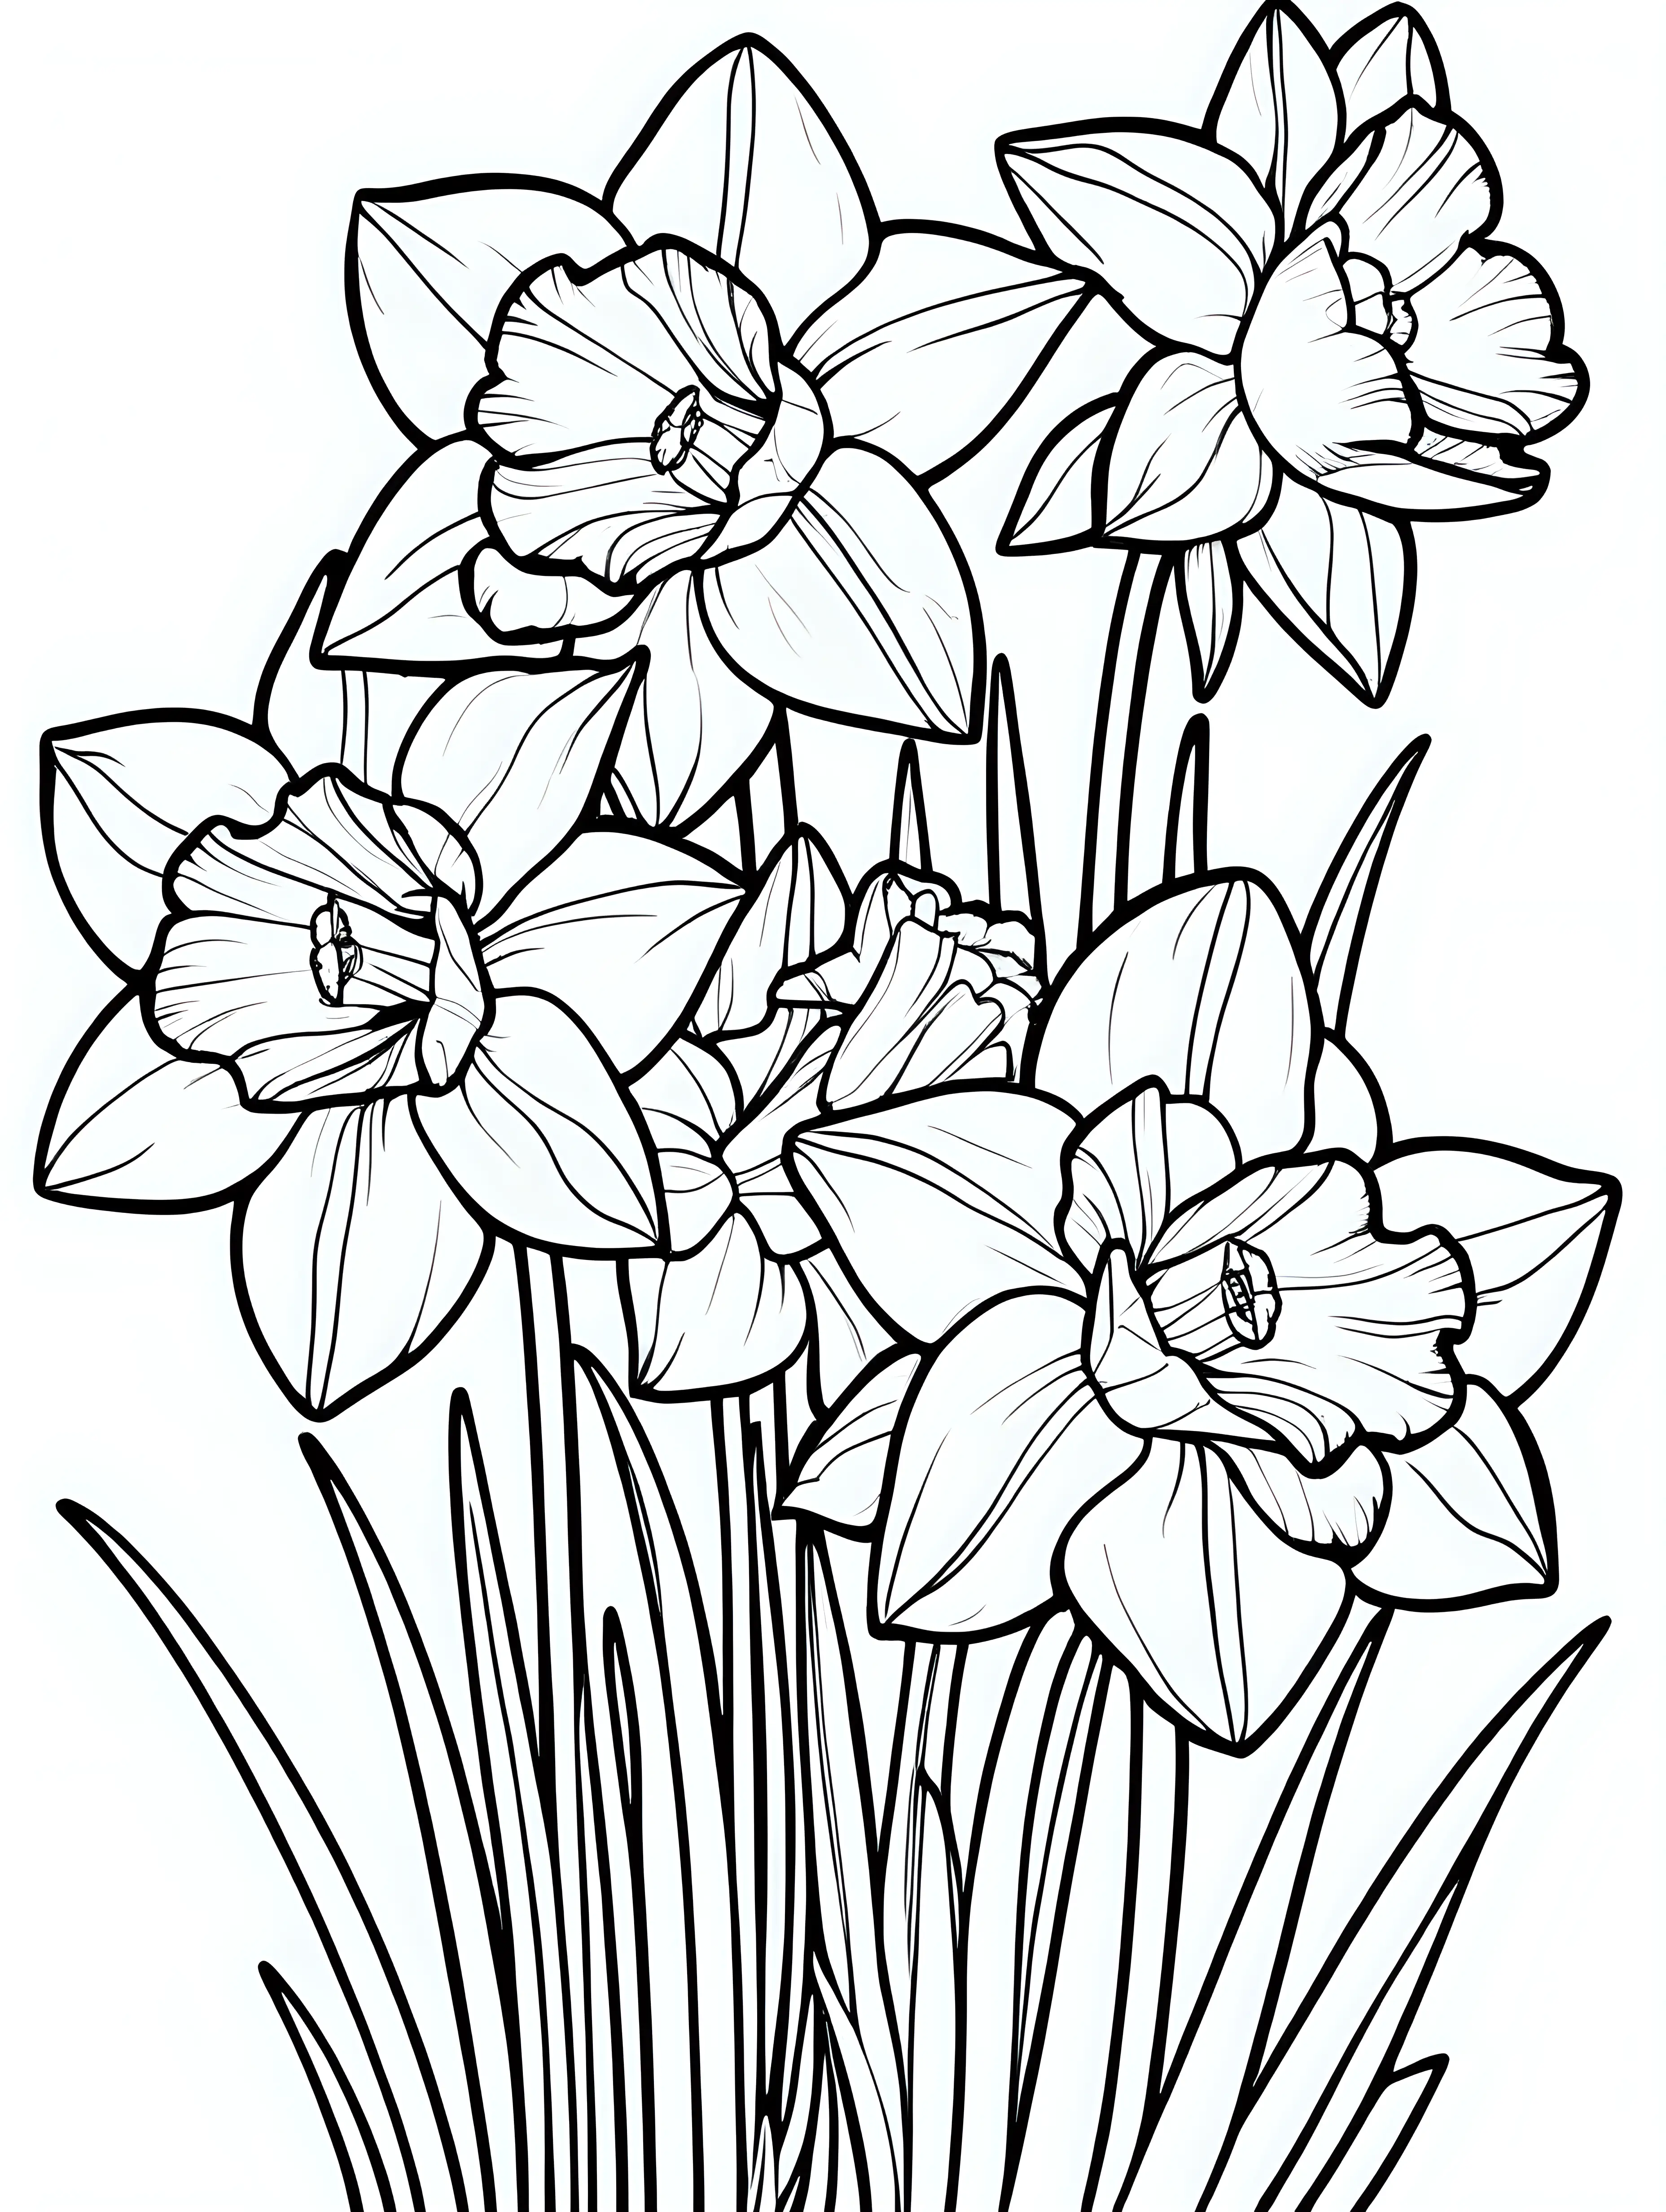 Beautiful large narcissus flowers black and white coloring page, cartoon style, thin lines, few details, no background, no shadows, no greys